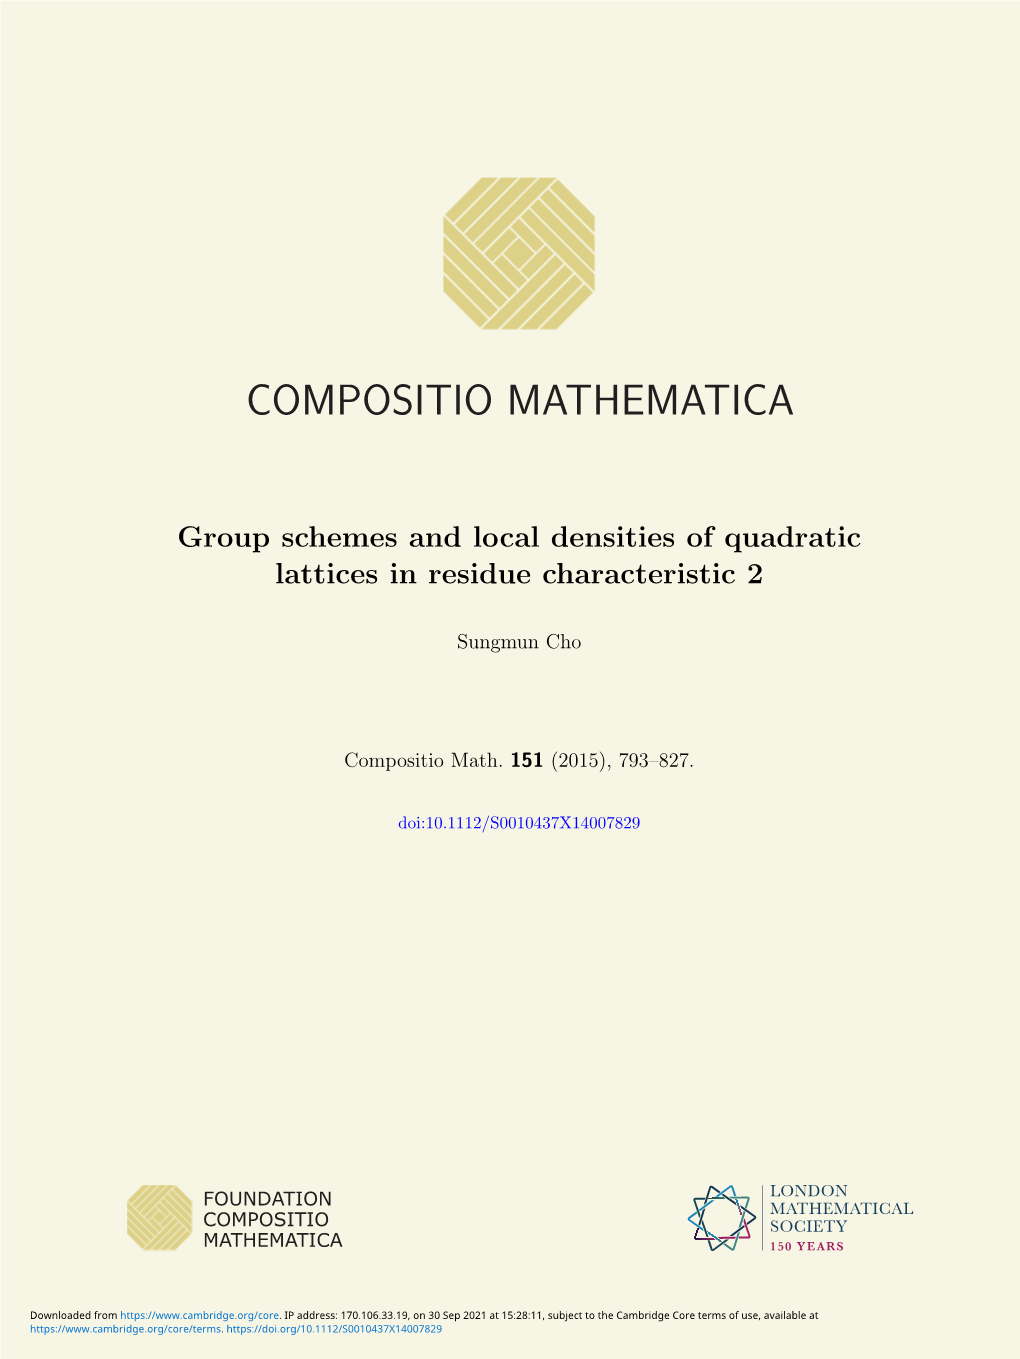 Group Schemes and Local Densities of Quadratic Lattices in Residue Characteristic 2